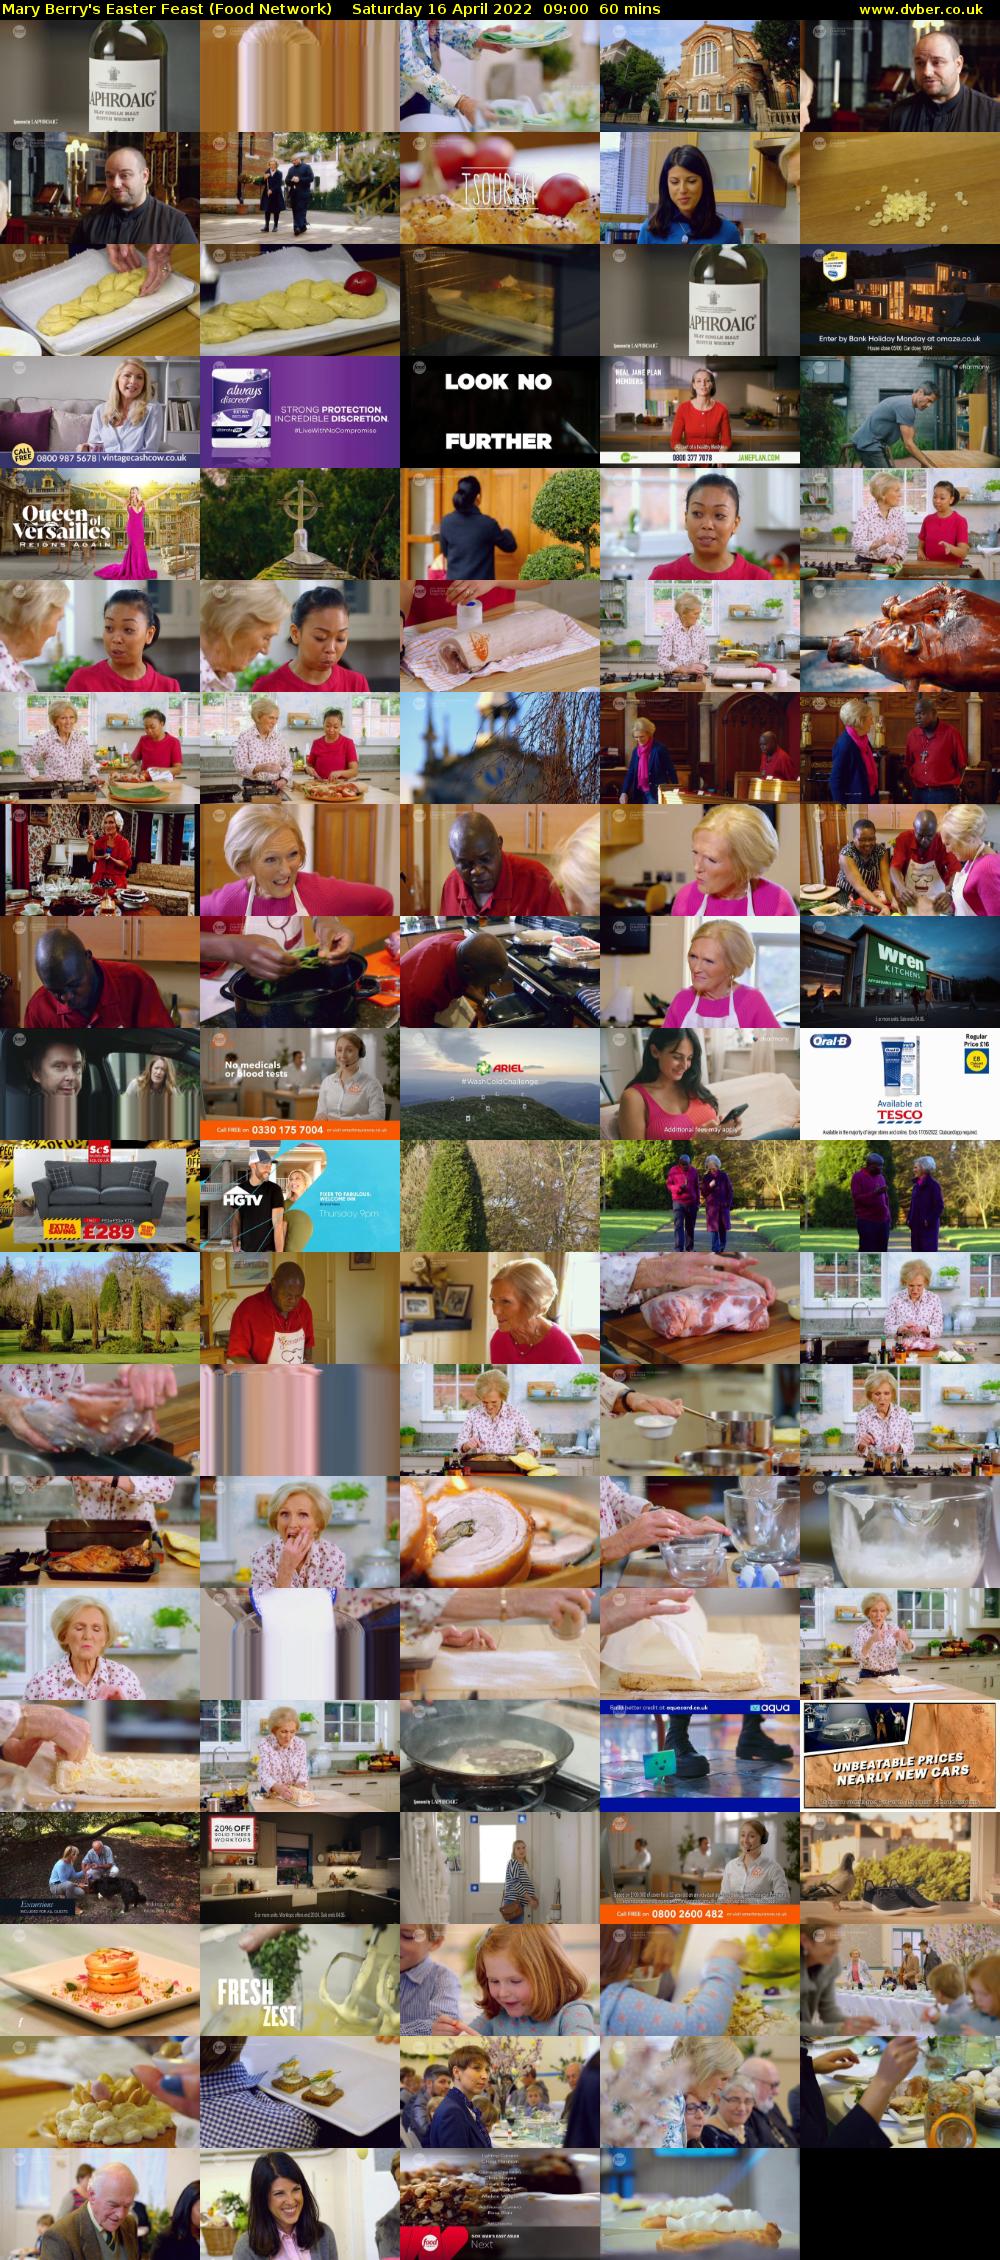 Mary Berry's Easter Feast (Food Network) Saturday 16 April 2022 09:00 - 10:00